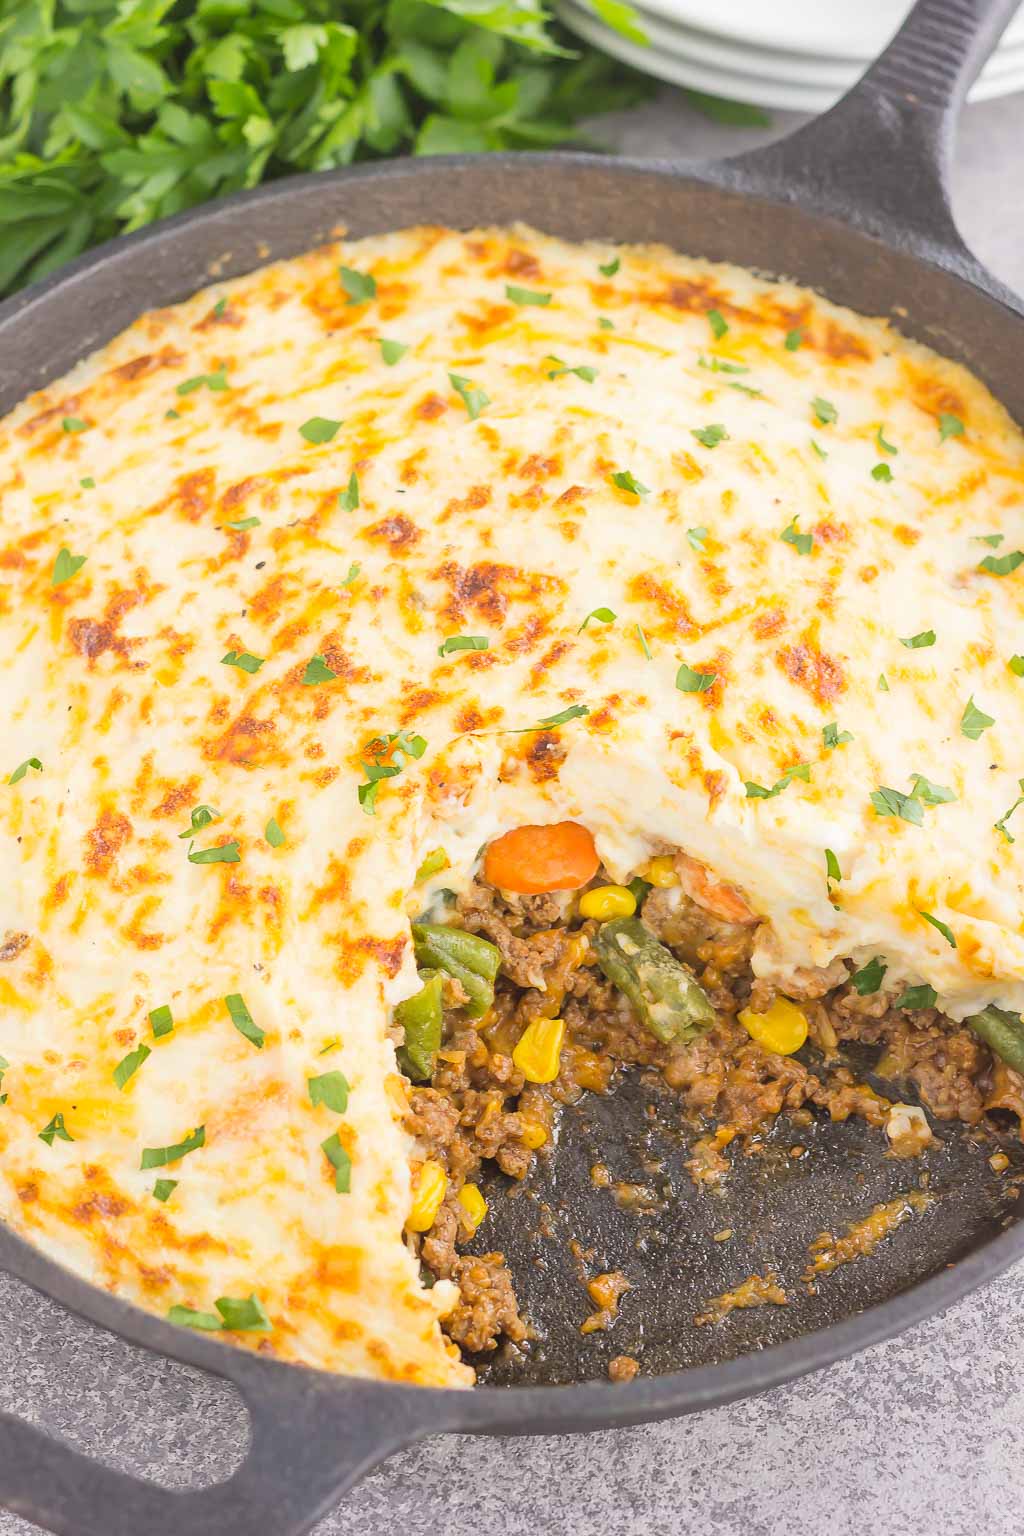 This Easy Shepherd's Pie features a unique spin on the classic version and is ready in less than 20 minutes. Loaded with zesty ground beef, cheddar cheese, mixed veggies, and topped with creamy, cheesy mashed potatoes, this is the ultimate comfort dish for everyone to enjoy!